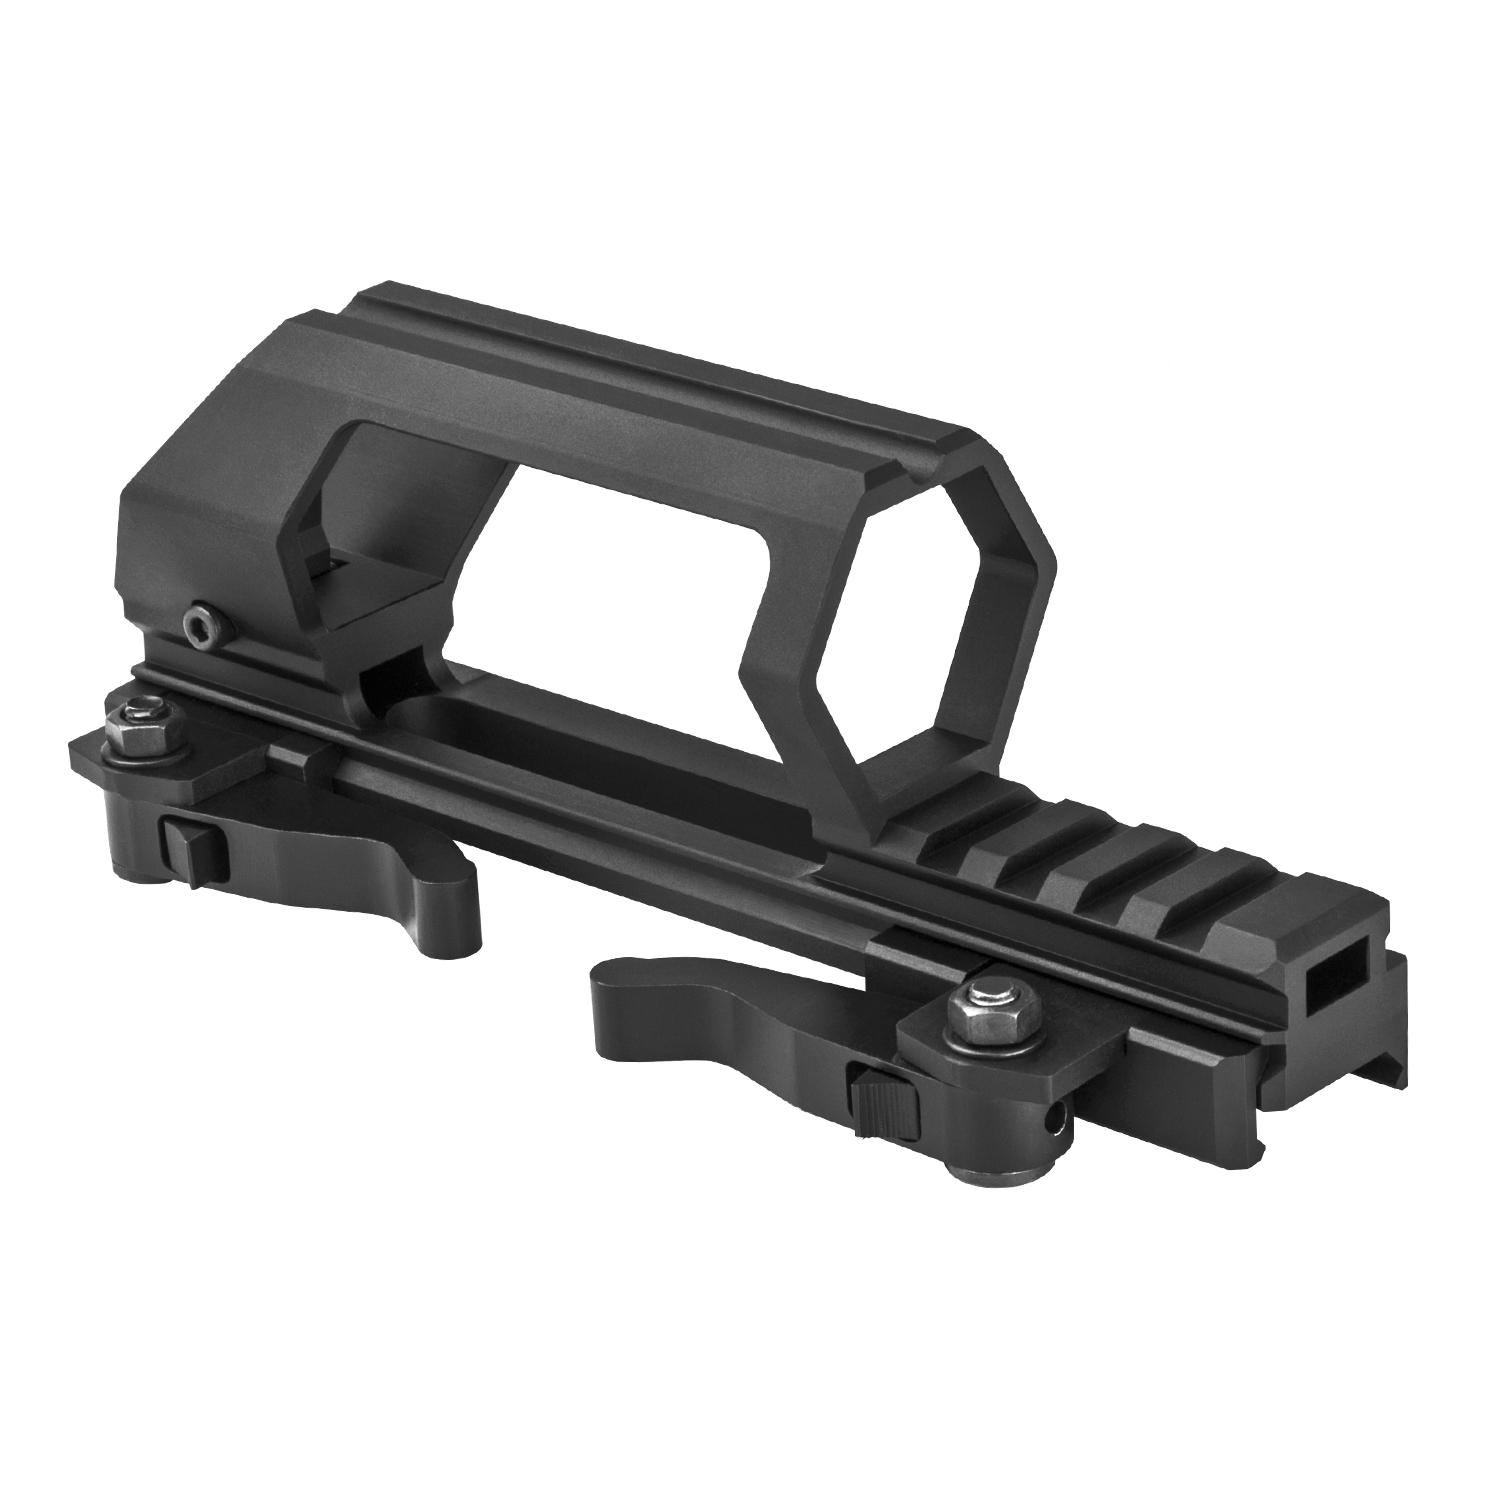 AR15 Advanced Dot Carry Handle provides a new stylish look with a lot of fe...